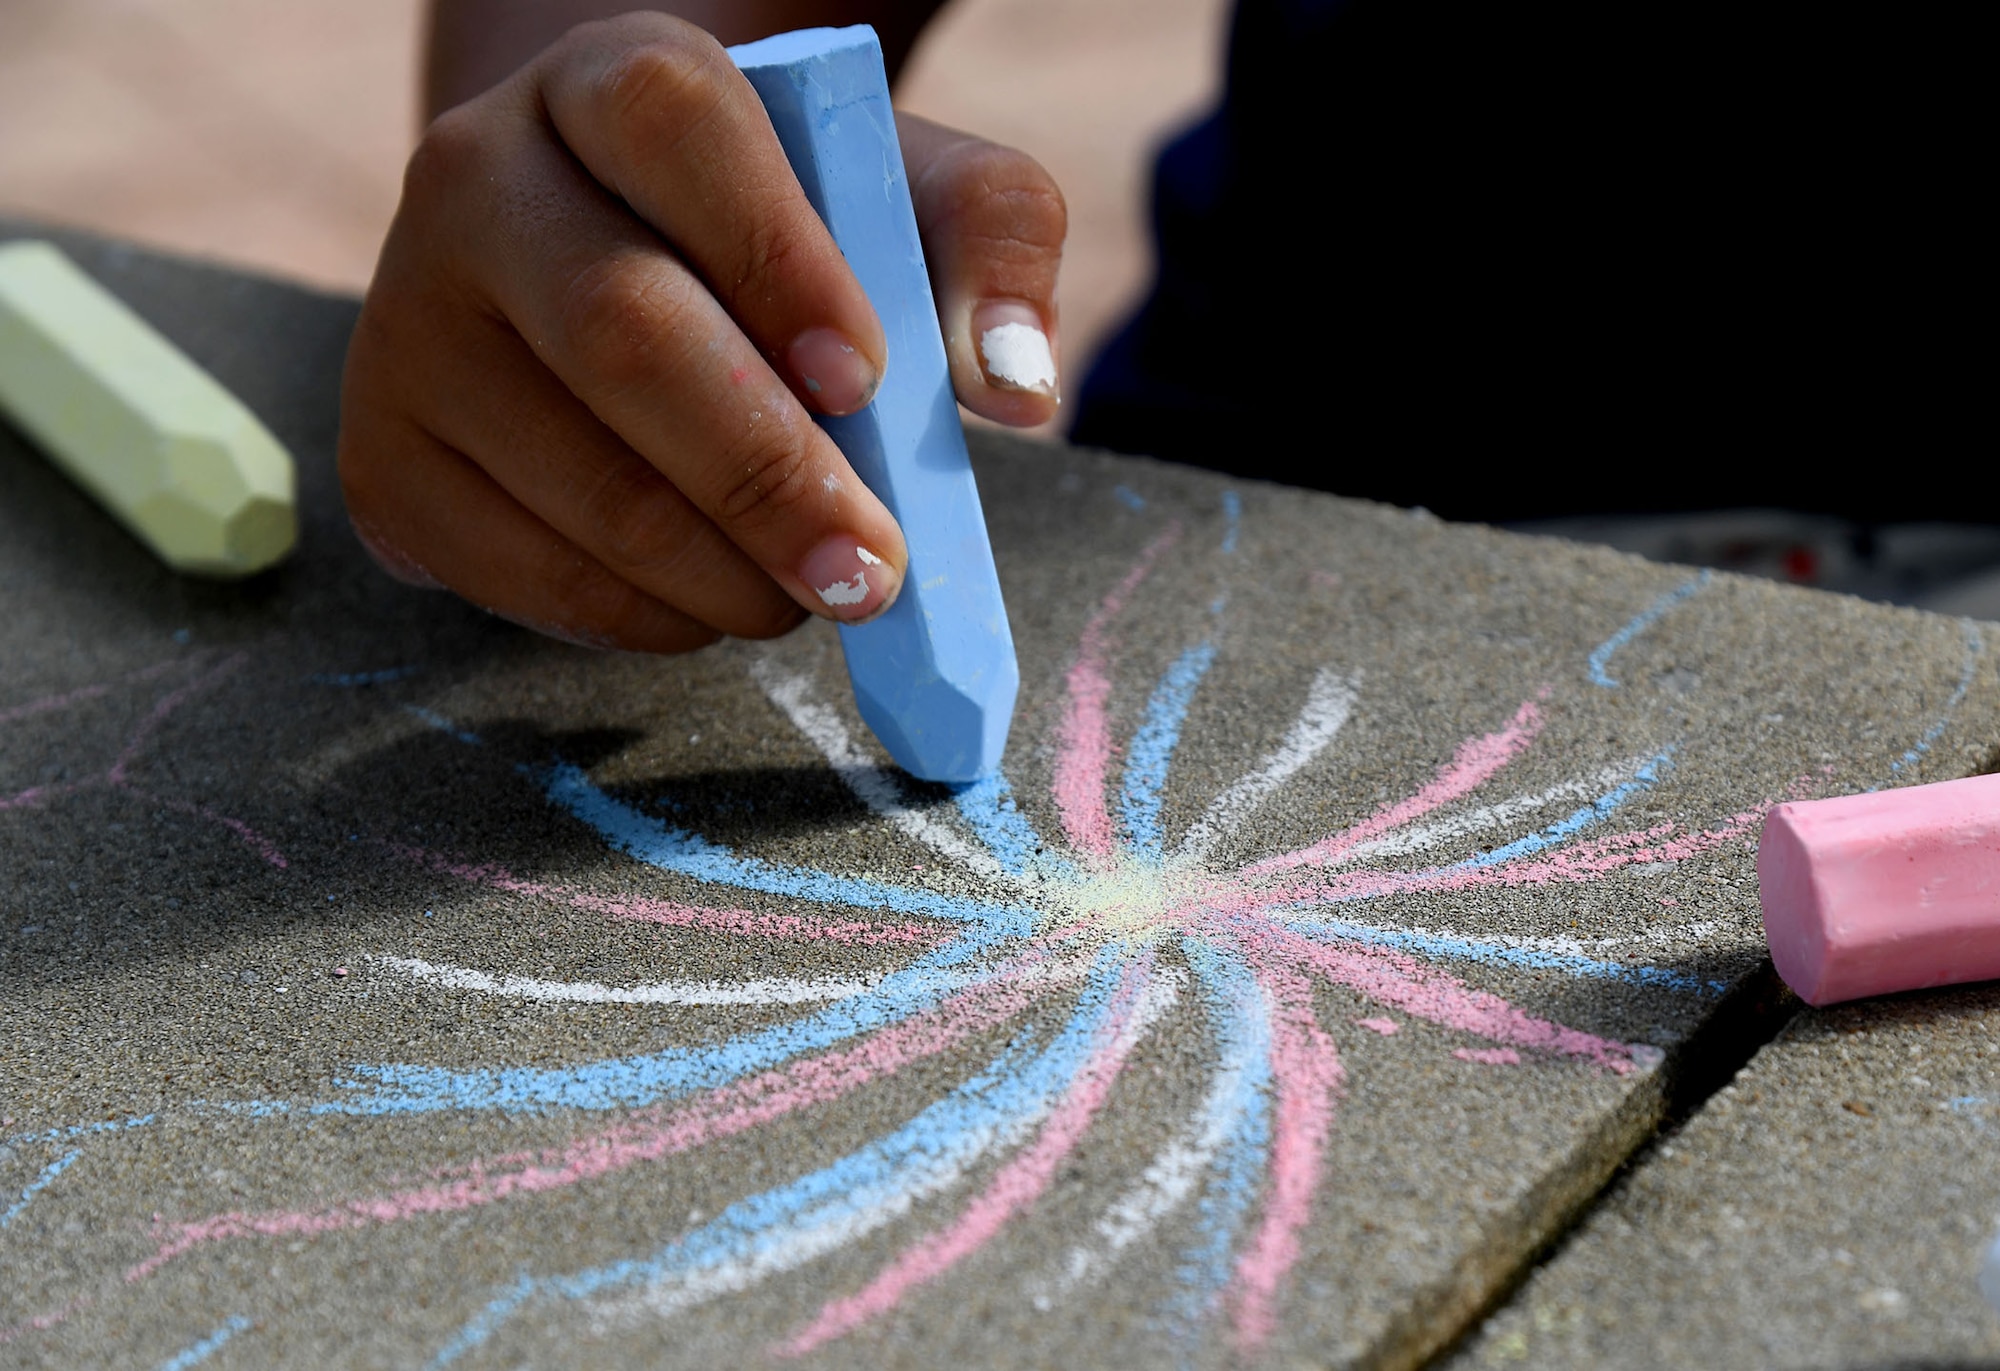 Alexandra Garcia, daughter of U.S. Navy Petty Officer 2nd Class Bonicio Garcia, Naval Mobile Construction Betallion Center 1 Construction Mechanic, Gulfport, Mississippi, draws a firework with chalk during Freedom Fest at the Bay Breeze Event Center on Keesler Air Force Base, Mississippi, June 30, 2022. The event included a hot wing eating contest, a frozen mullet toss competition and fireworks. (U.S. Air Force photo by Kemberly Groue)